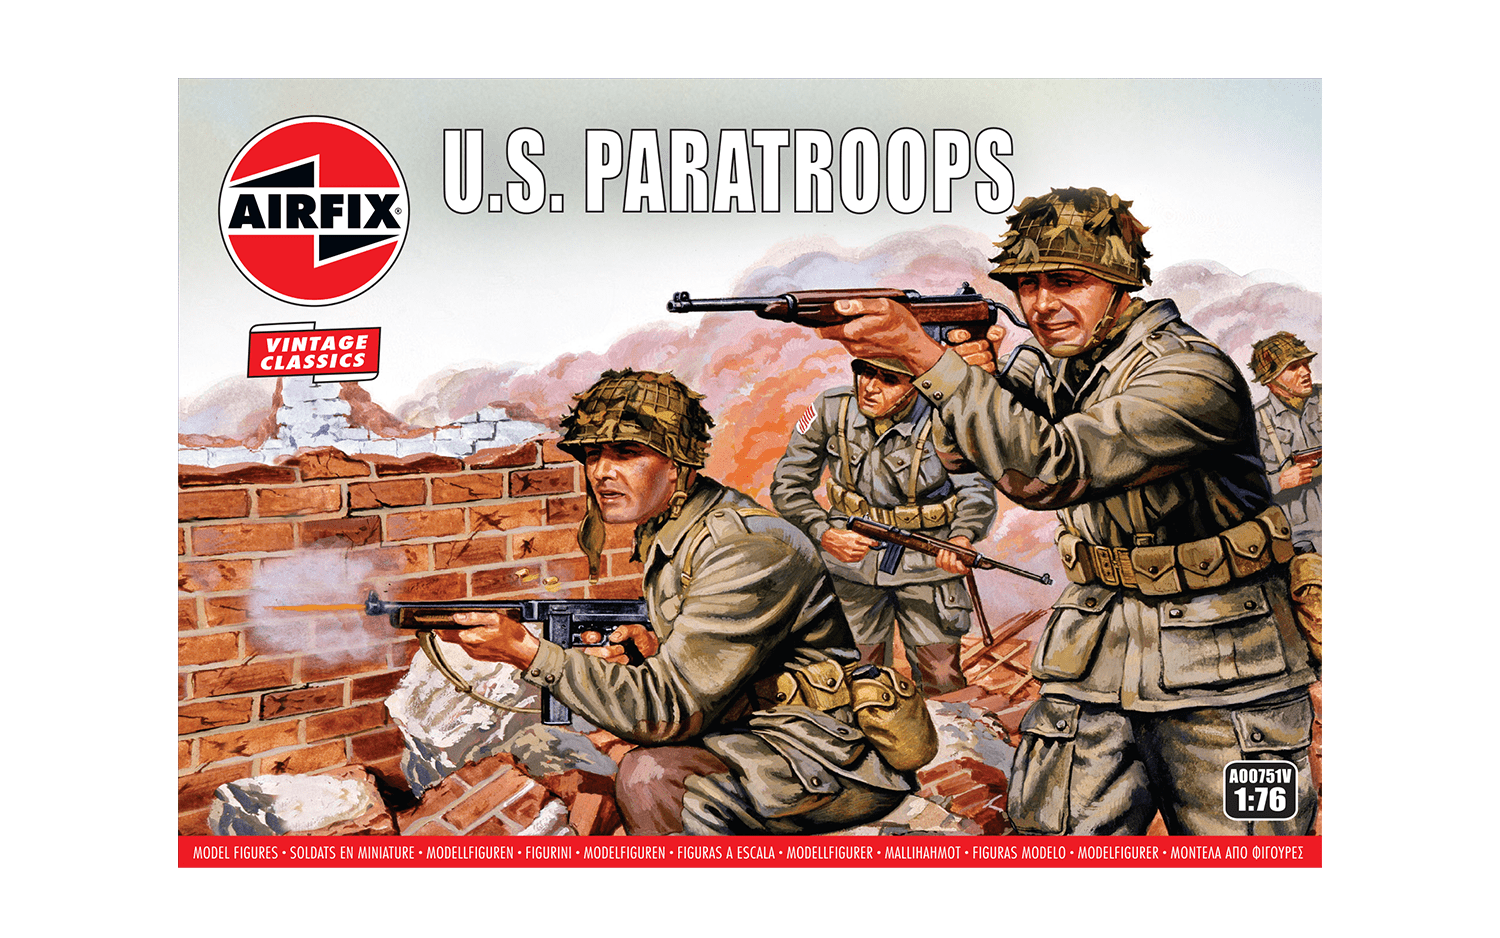 WWII US Paratroops (1:76) - Loaded Dice Barry Vale of Glamorgan CF64 3HD